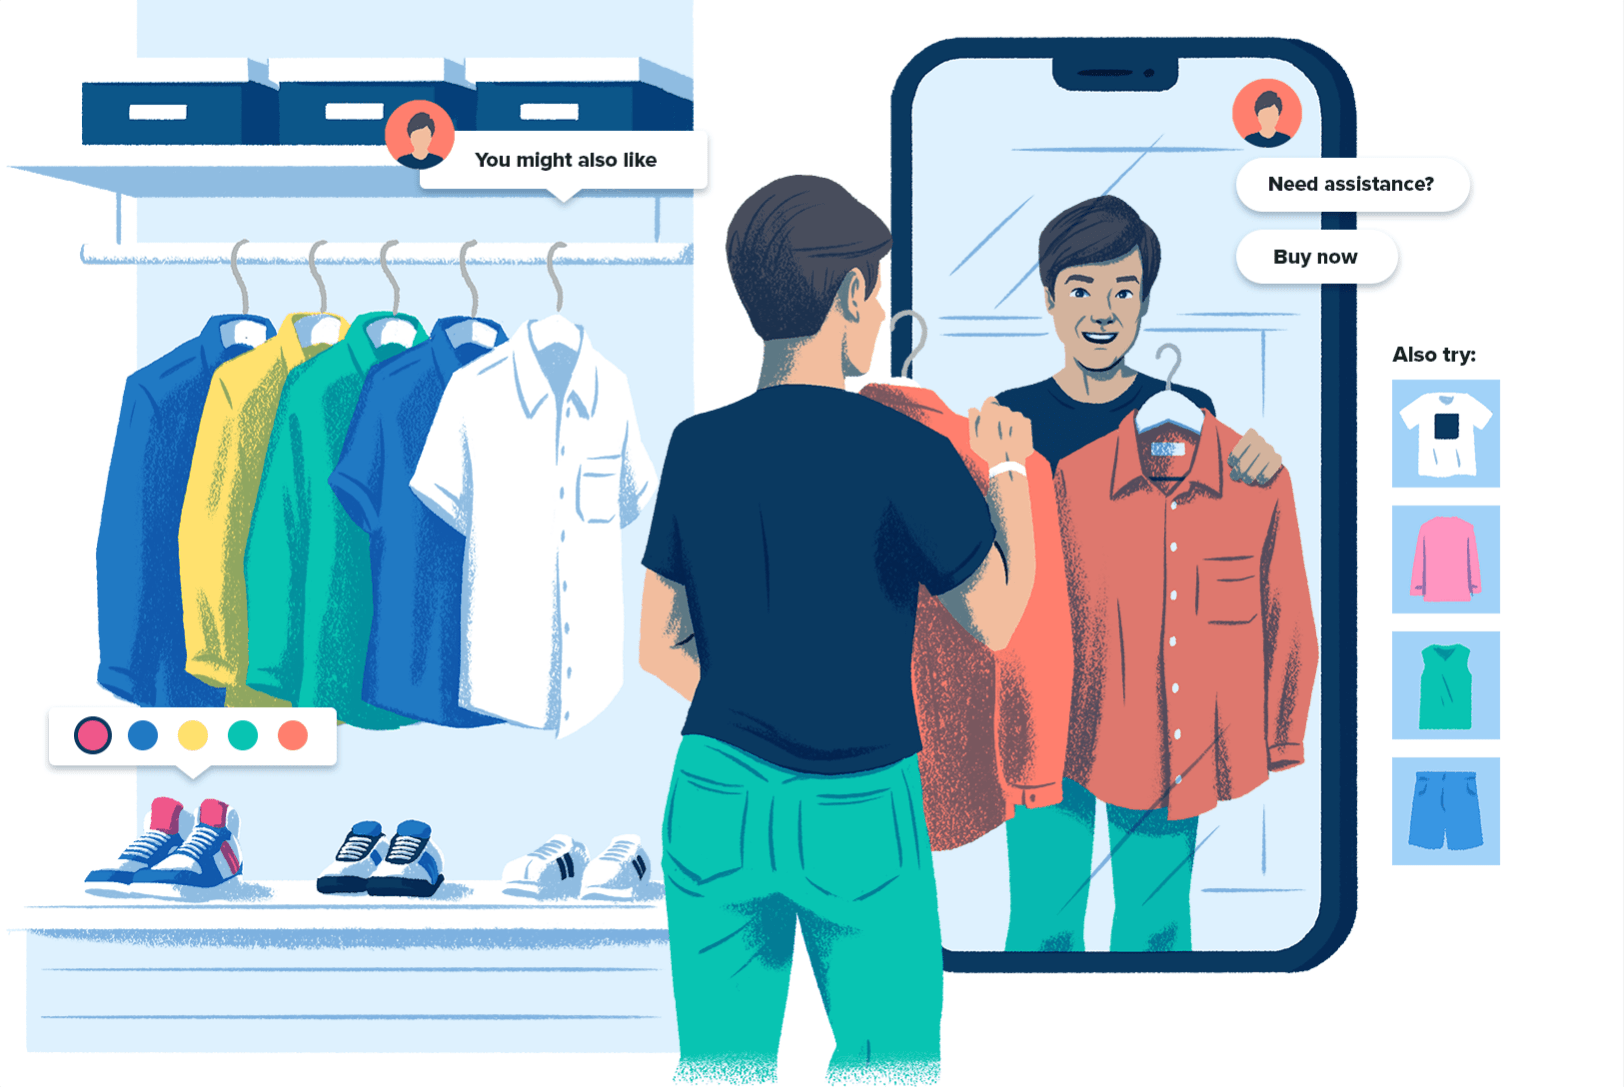 Illustration of a shopper in a storefront with a cell phone-shaped mirror and online shopping buttons on the merchandise , representing the in-store experience you can have shopping on social.